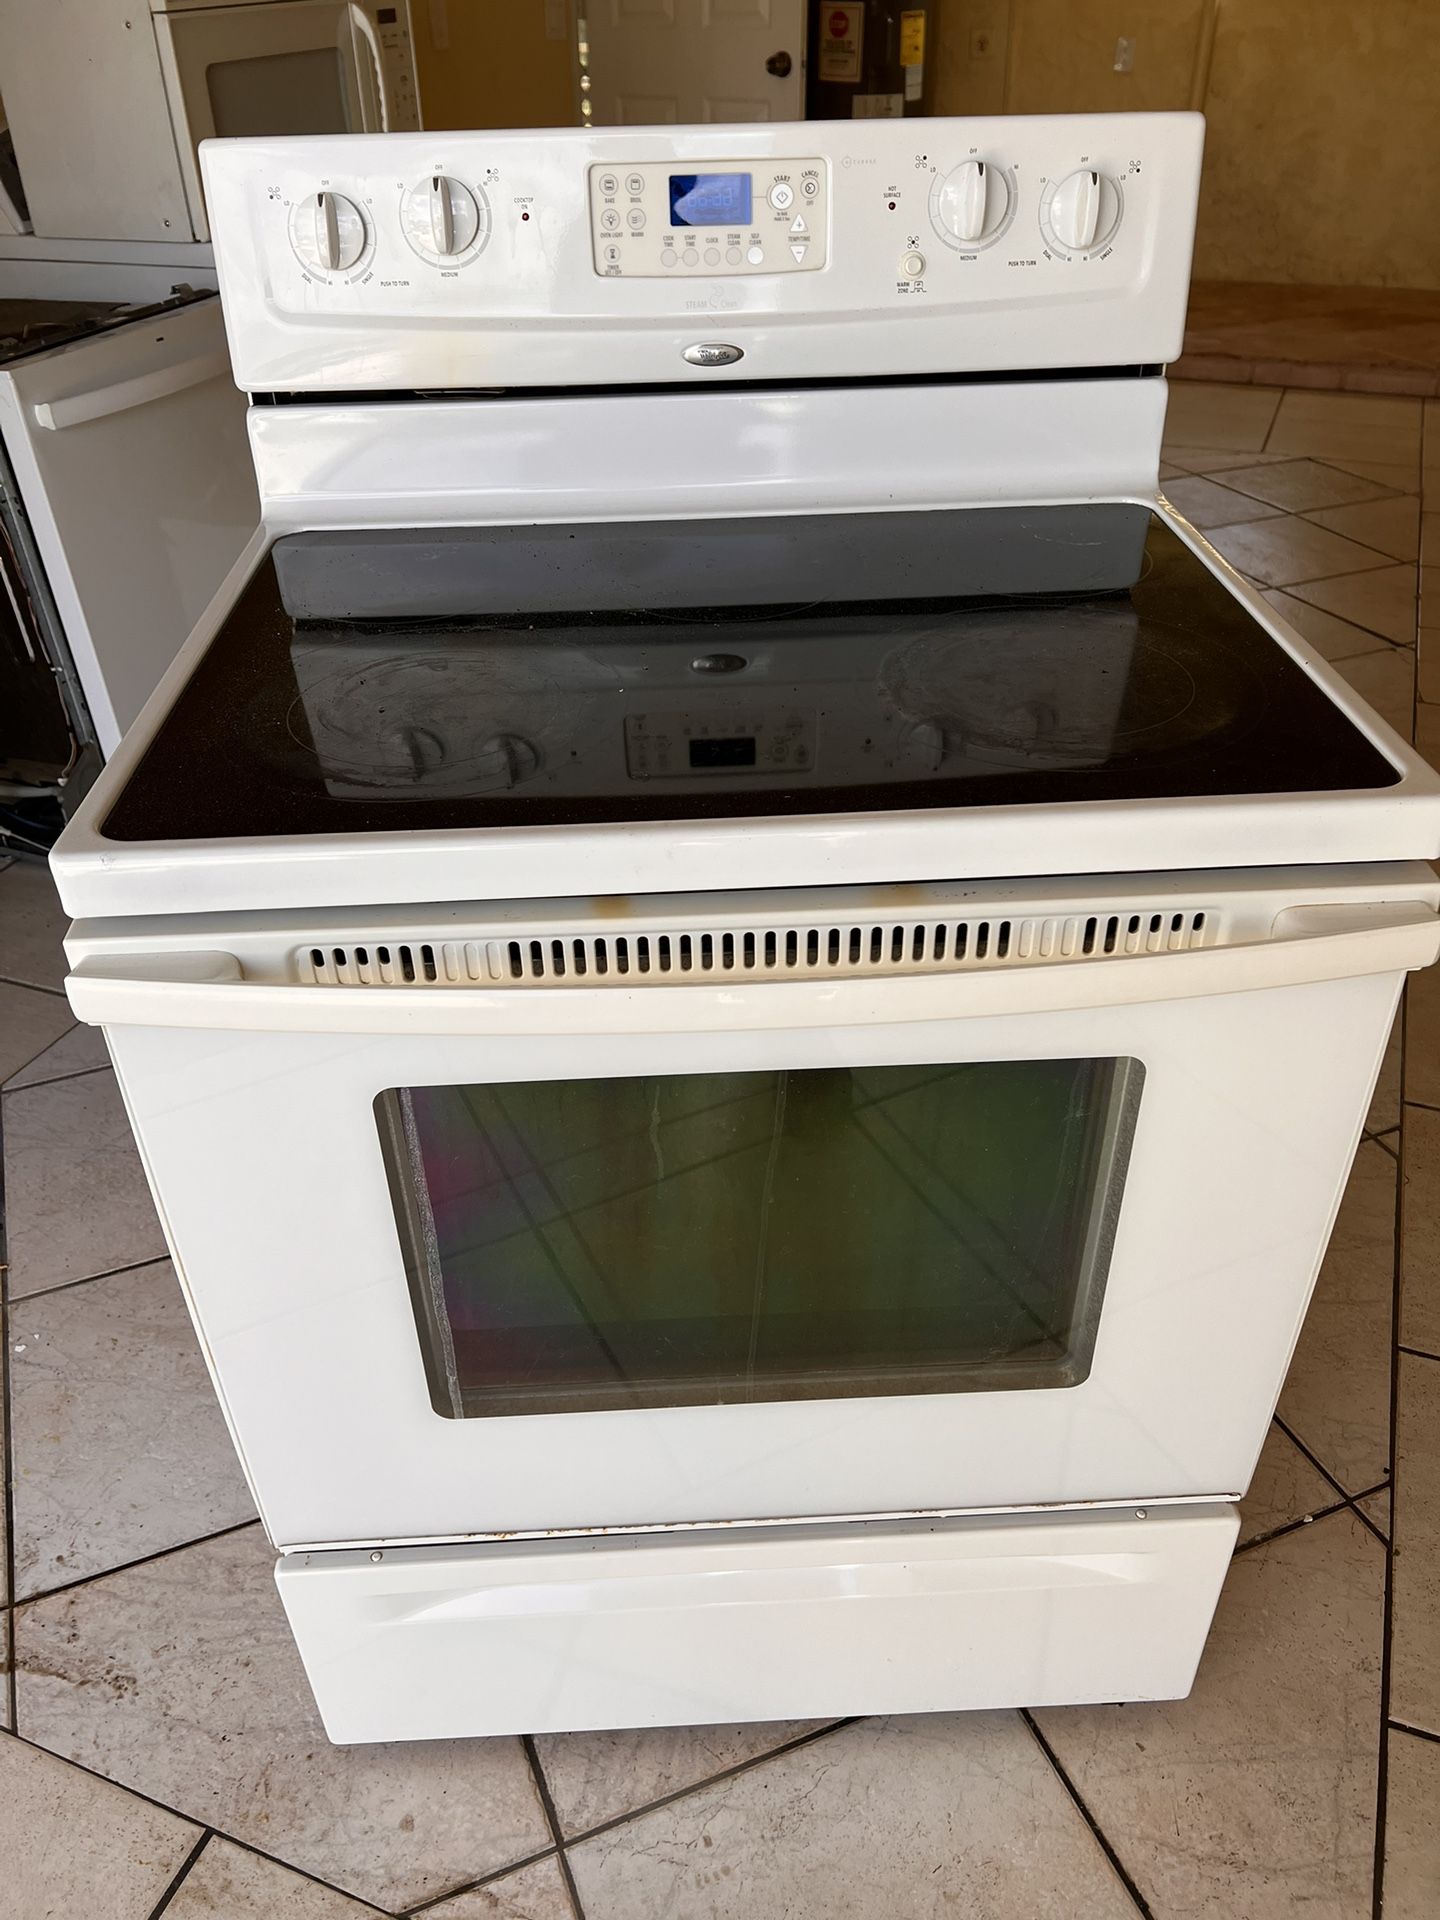 Whirlpool Glass Top Stove/oven